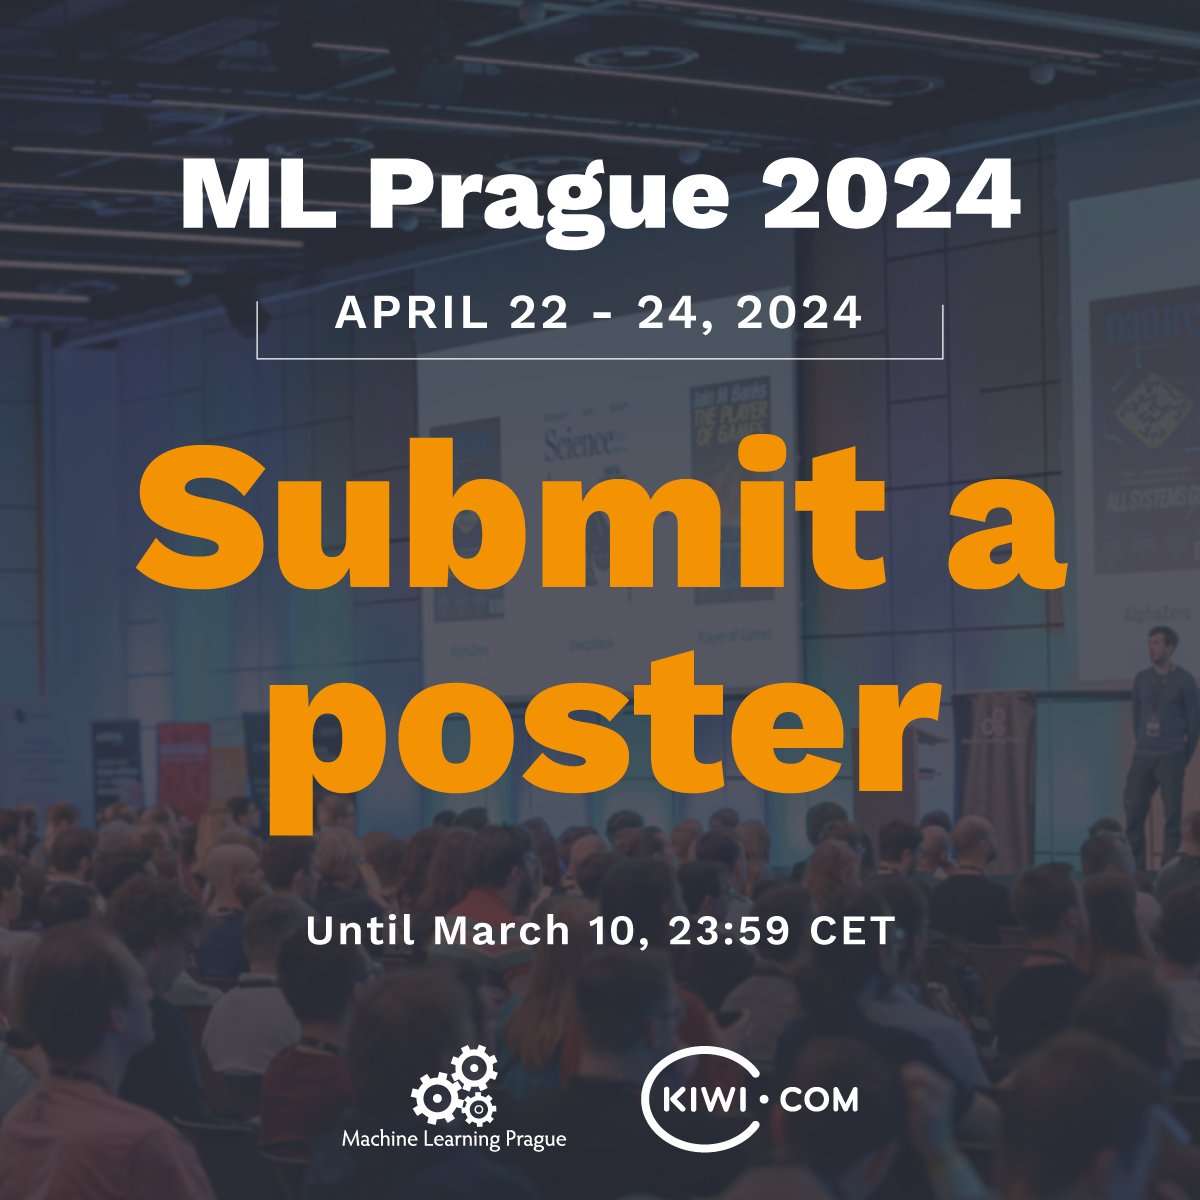 🌎🔎 We're searching for scientists, researchers, and engineers who would like to present their achievements in academic research or commercial applications of machine learning.

🫵 Is that you? 🫵 Submit a poster proposal before March 10, 2024. You can learn more about the…